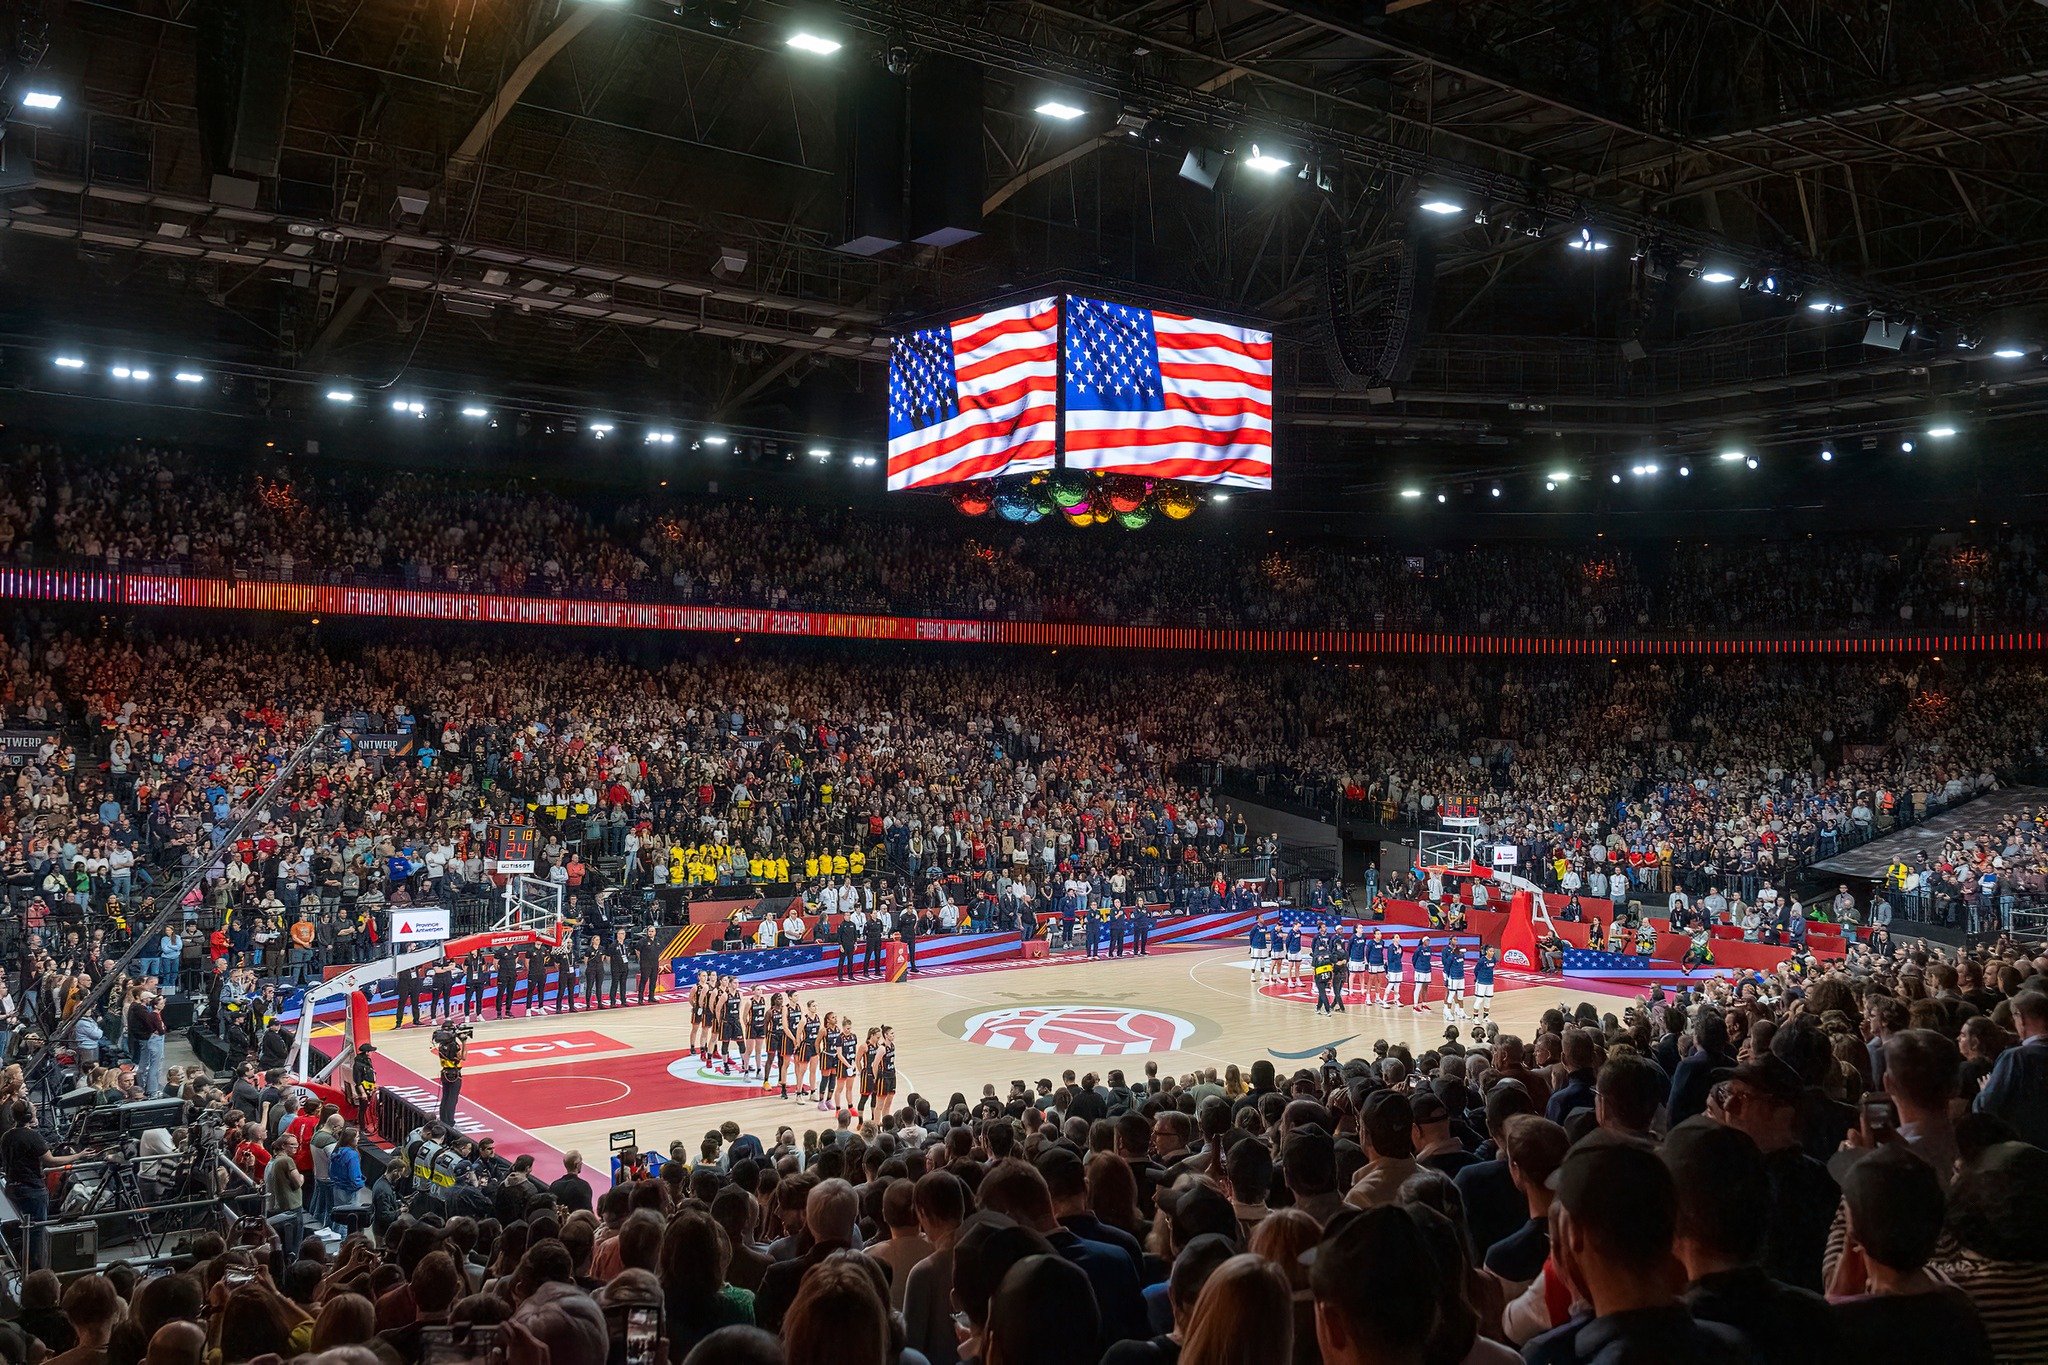 AB Sound and CHAUVET Professional Set Stage for Belgian-USA Olympic Qualifying Match